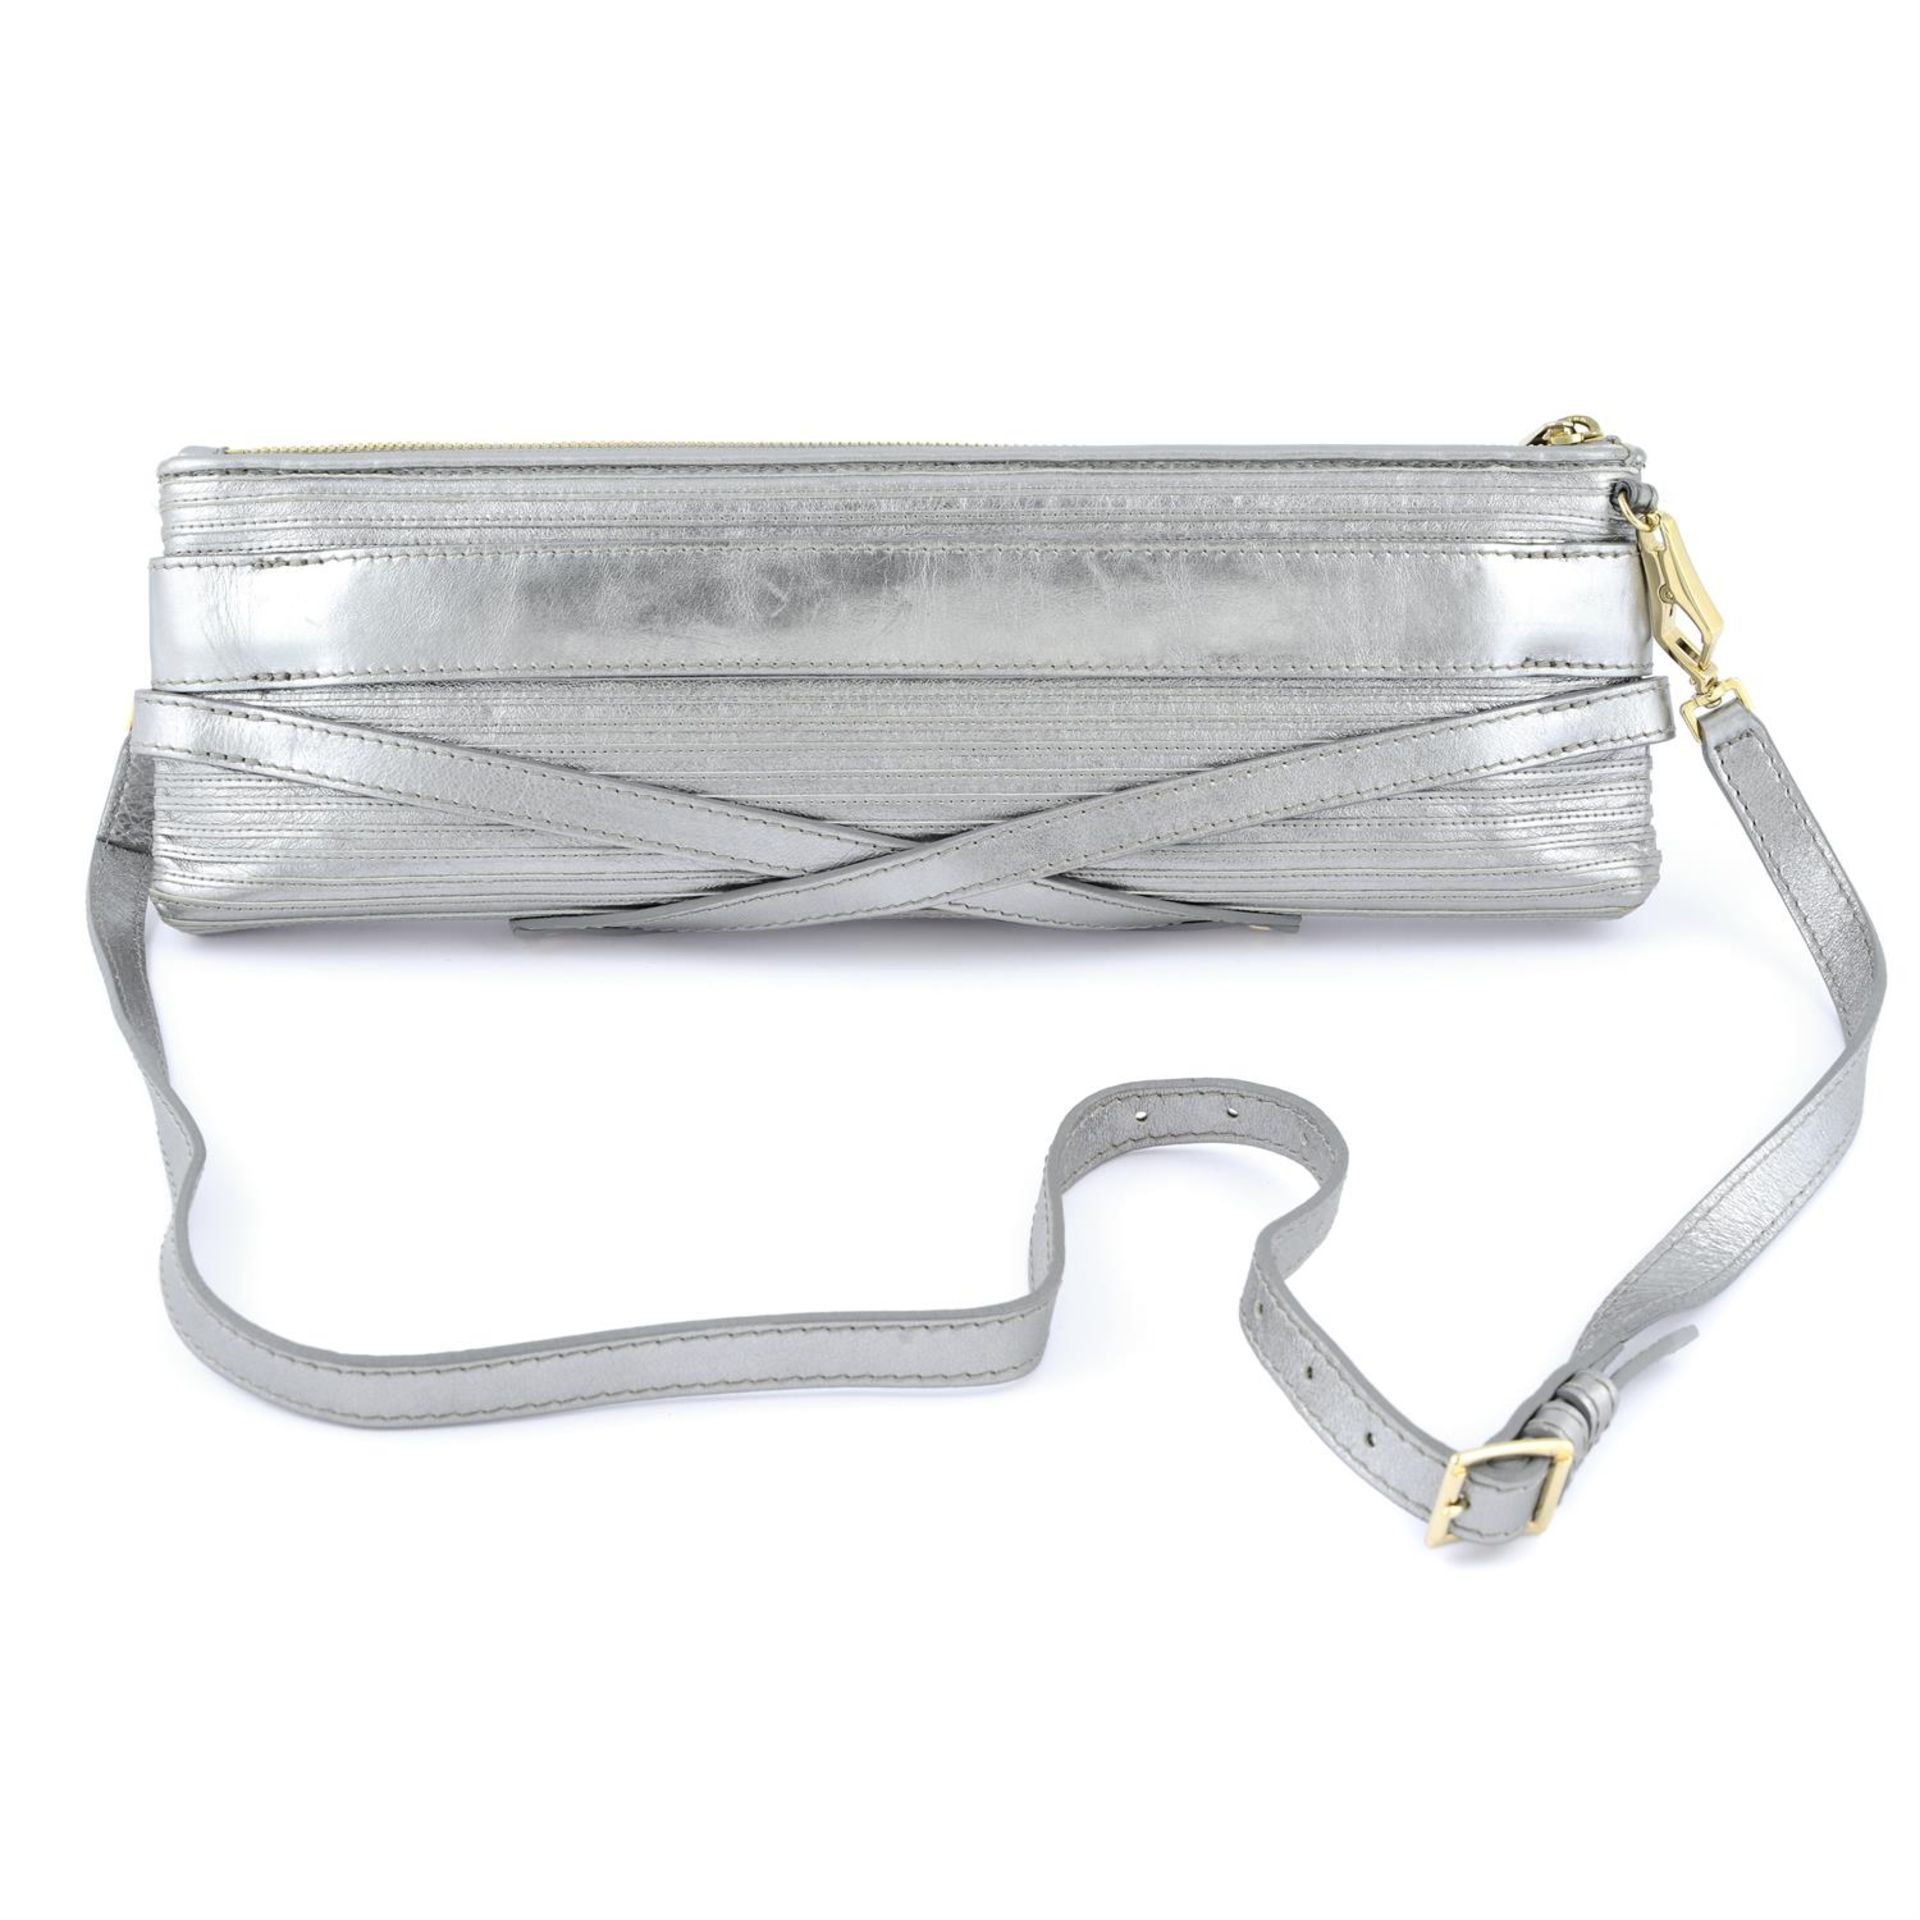 BURBERRY - a silver metallic leather Parmoor bridle clutch. - Image 2 of 4